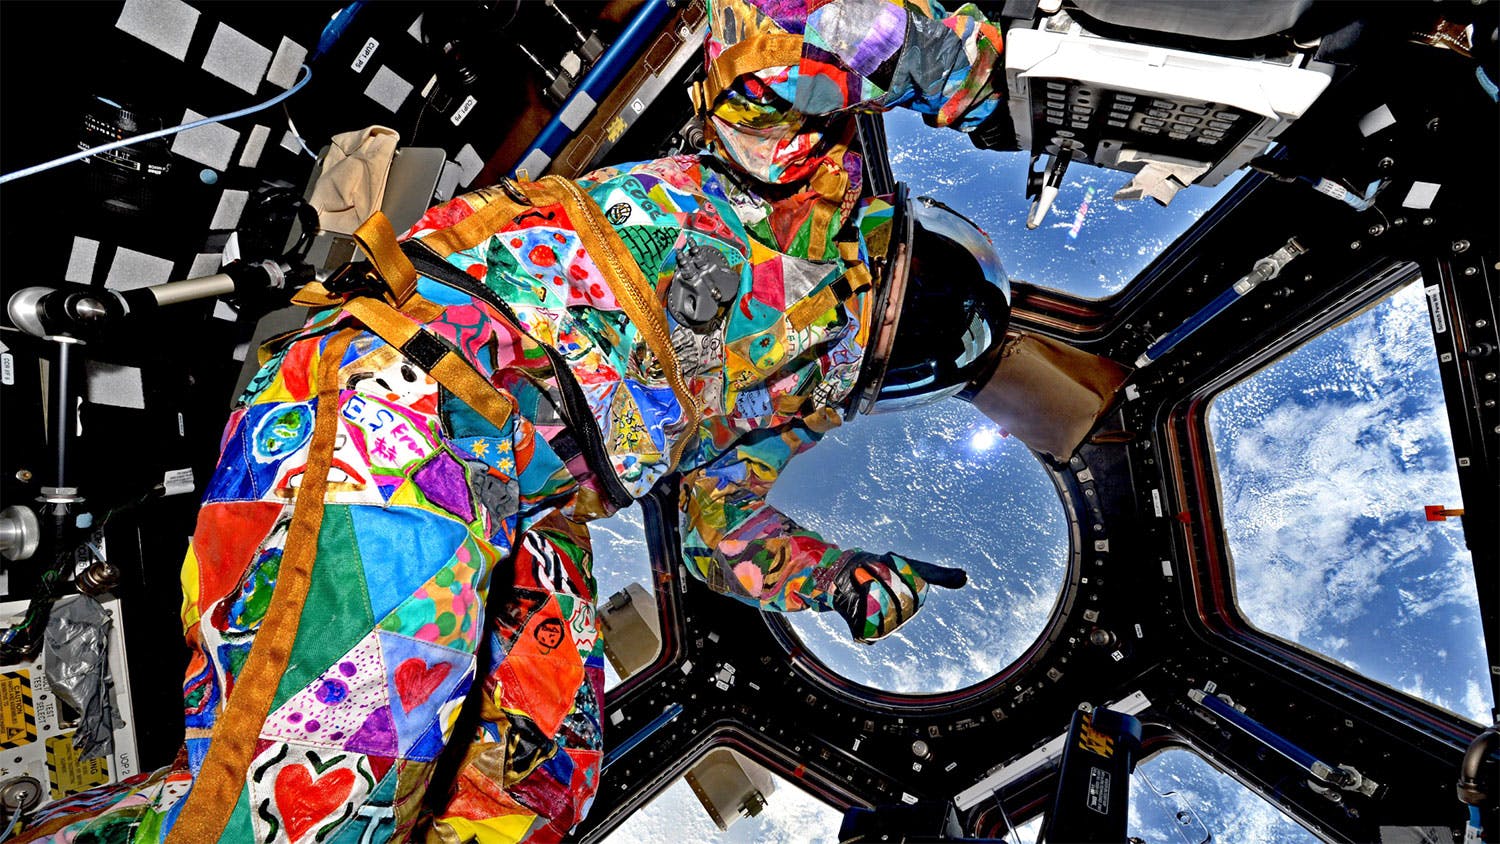 An astronaut wearing a vibrant, colorful spacesuit floats in a capsule